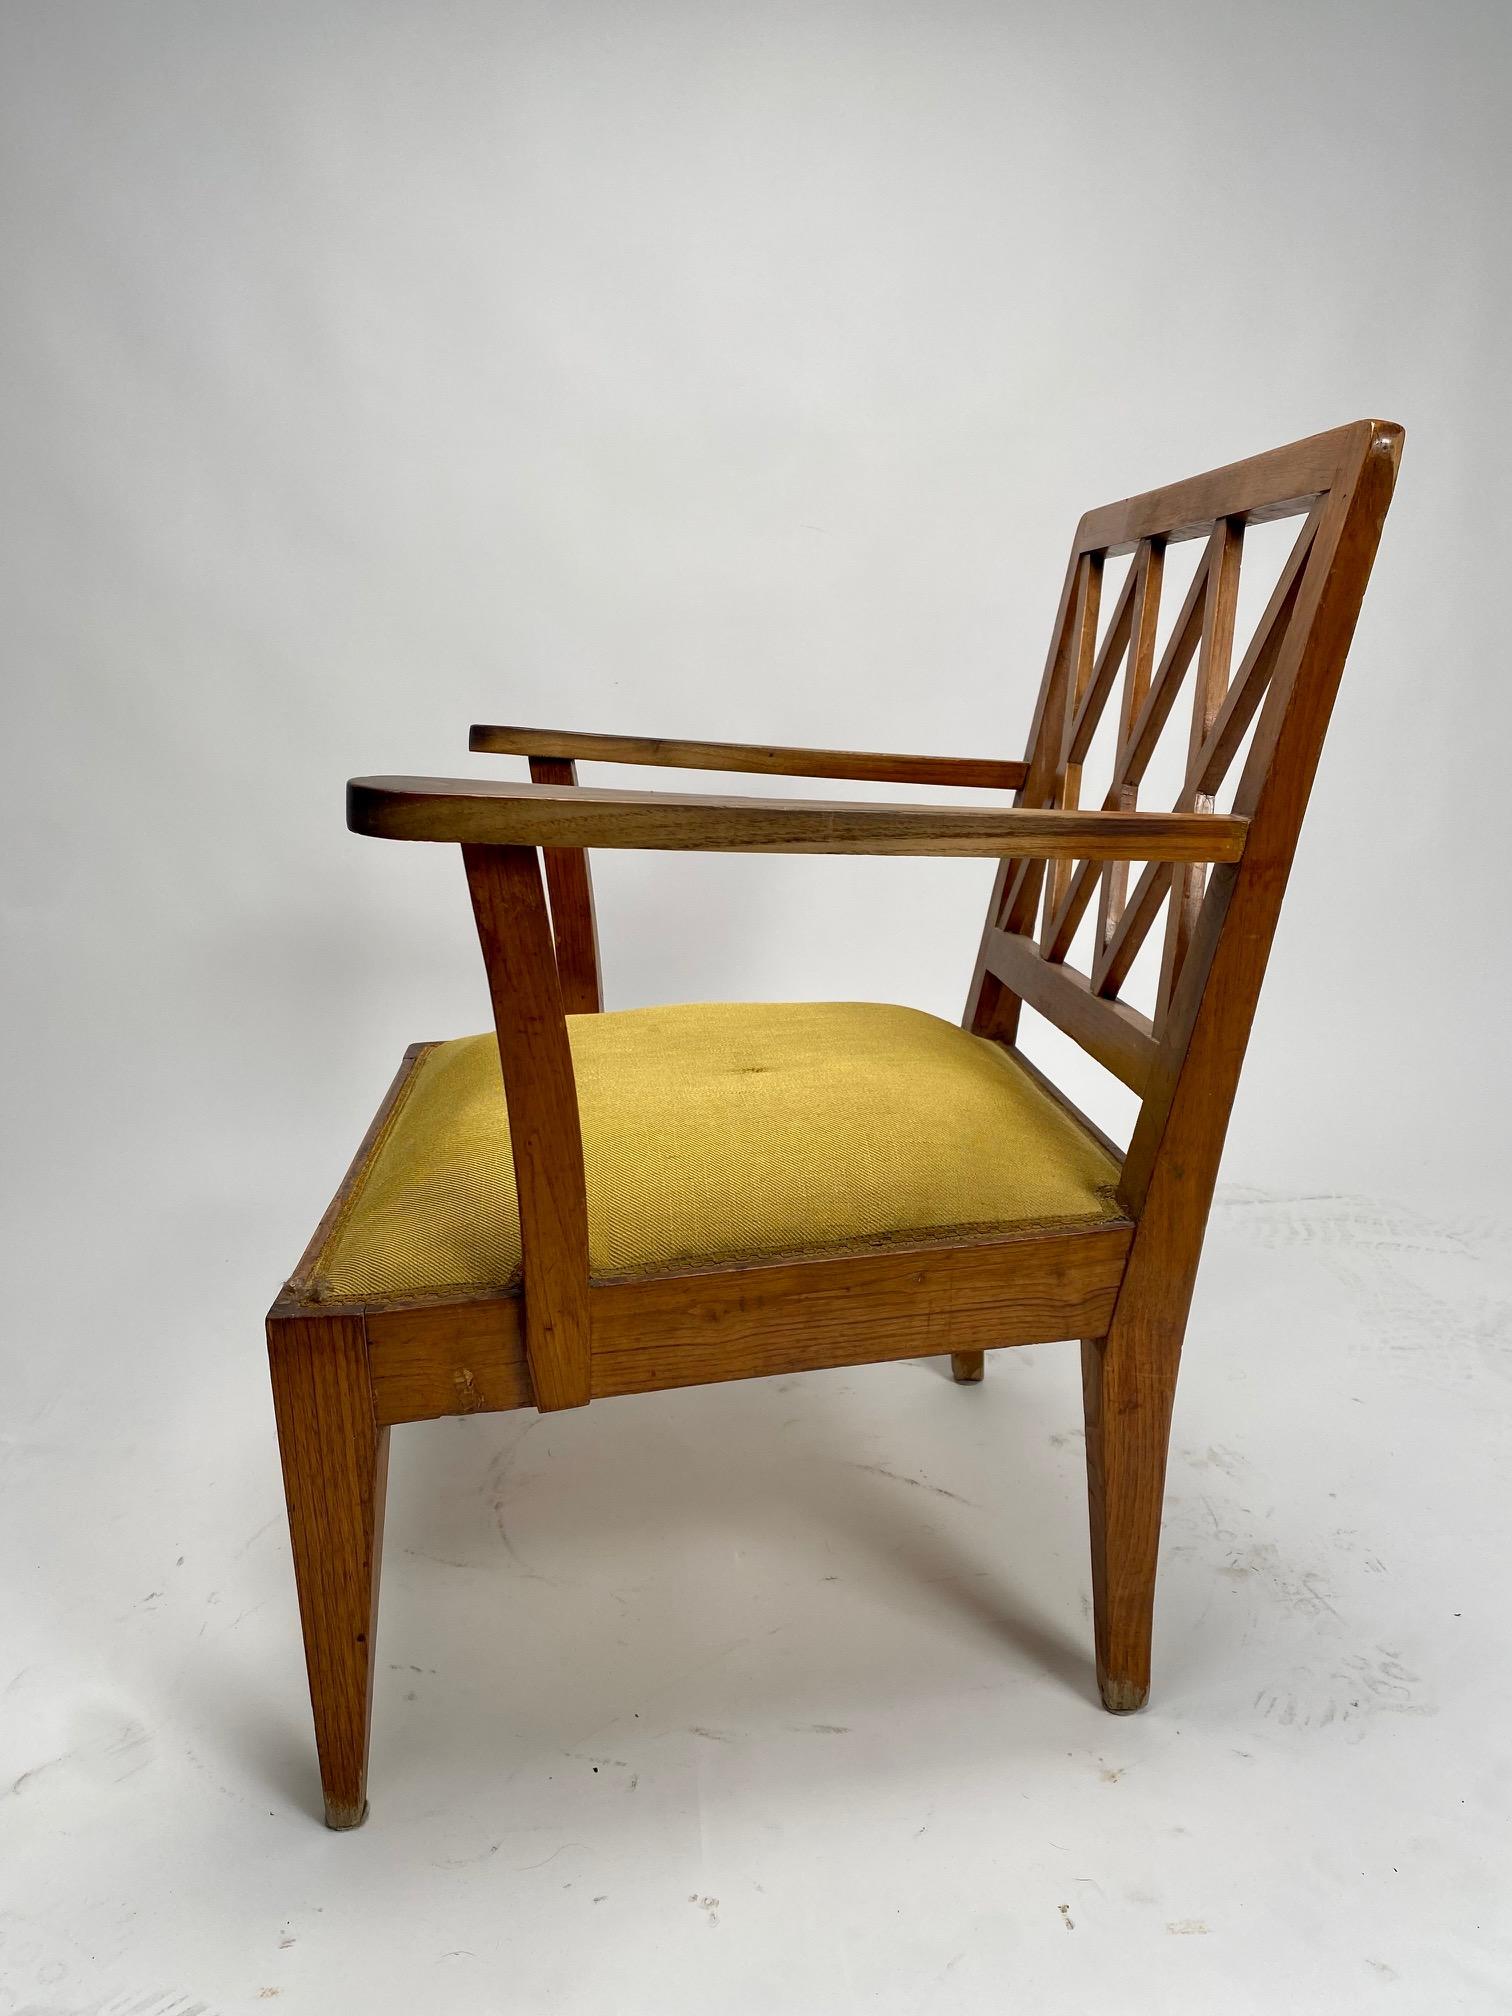 Italian Sculptural wooden Armchair, Gio Ponti Style, Italy, 1930s For Sale